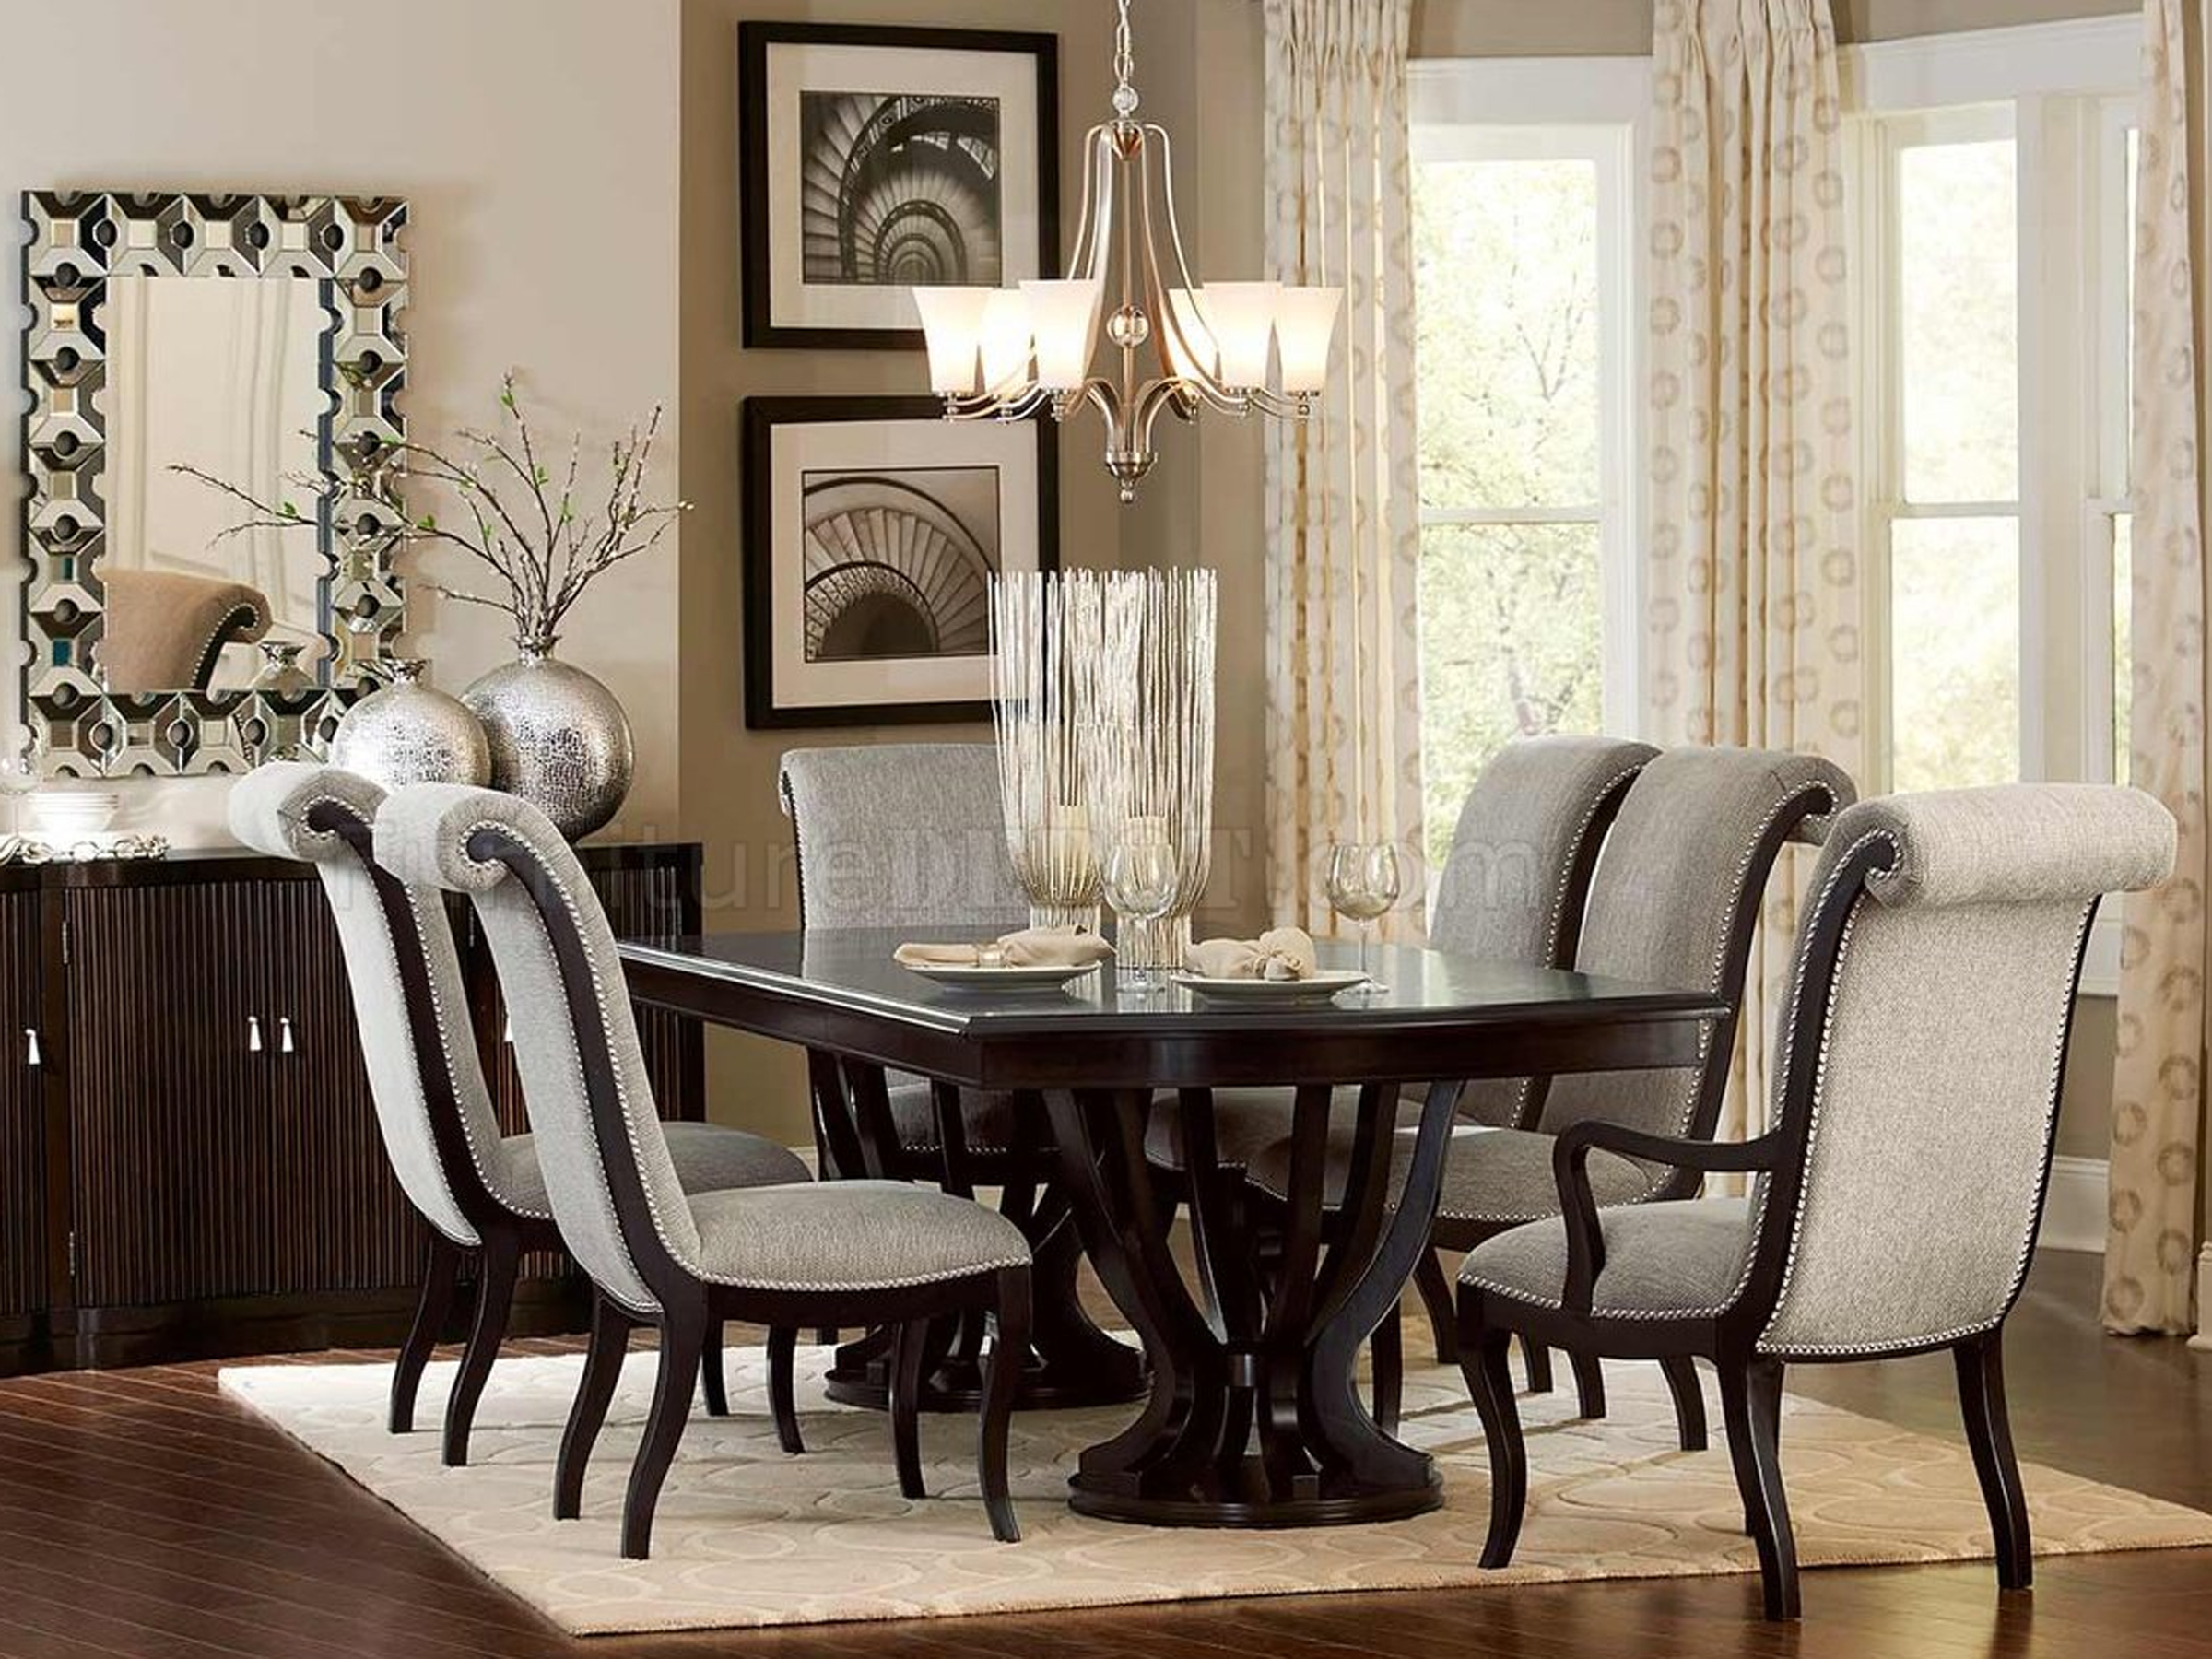 77he549477, Formal Dining Room Table Set Up